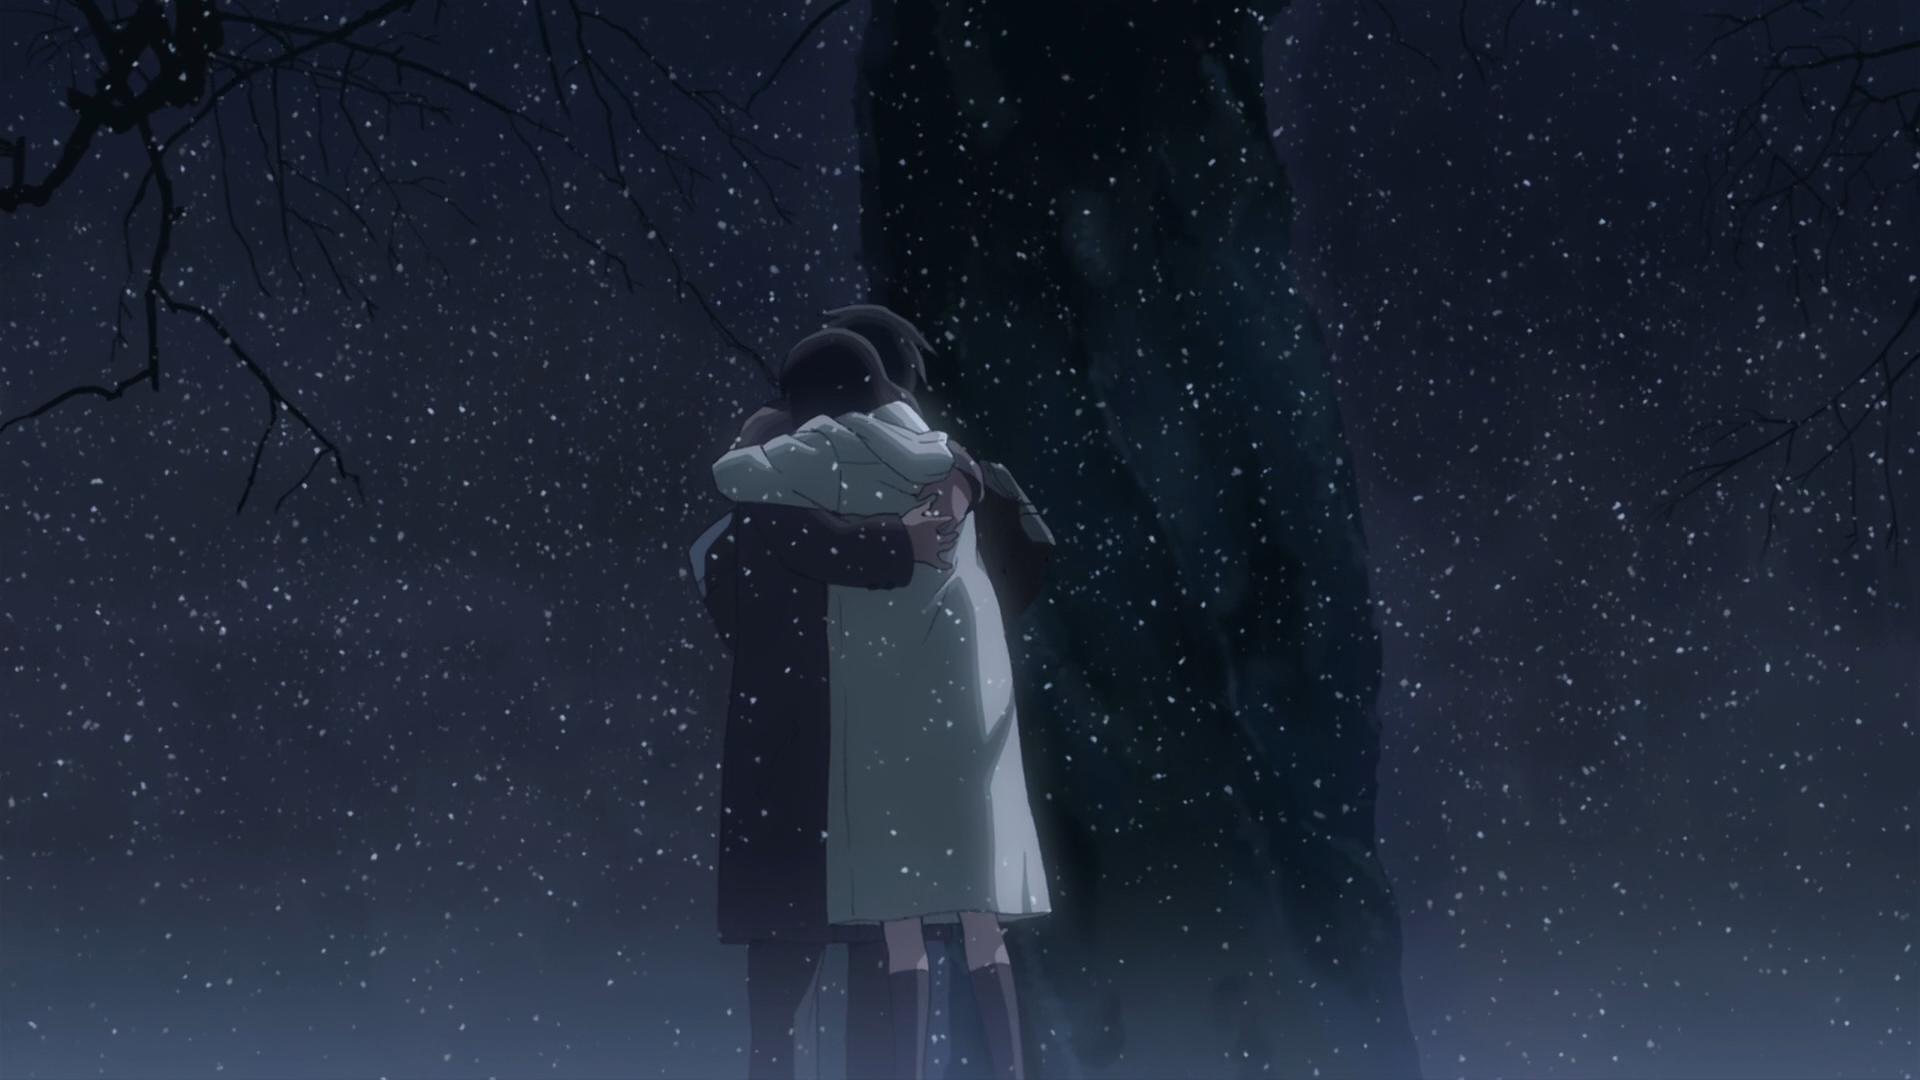 Christmas-themed anime - 5 Centimeters per Second